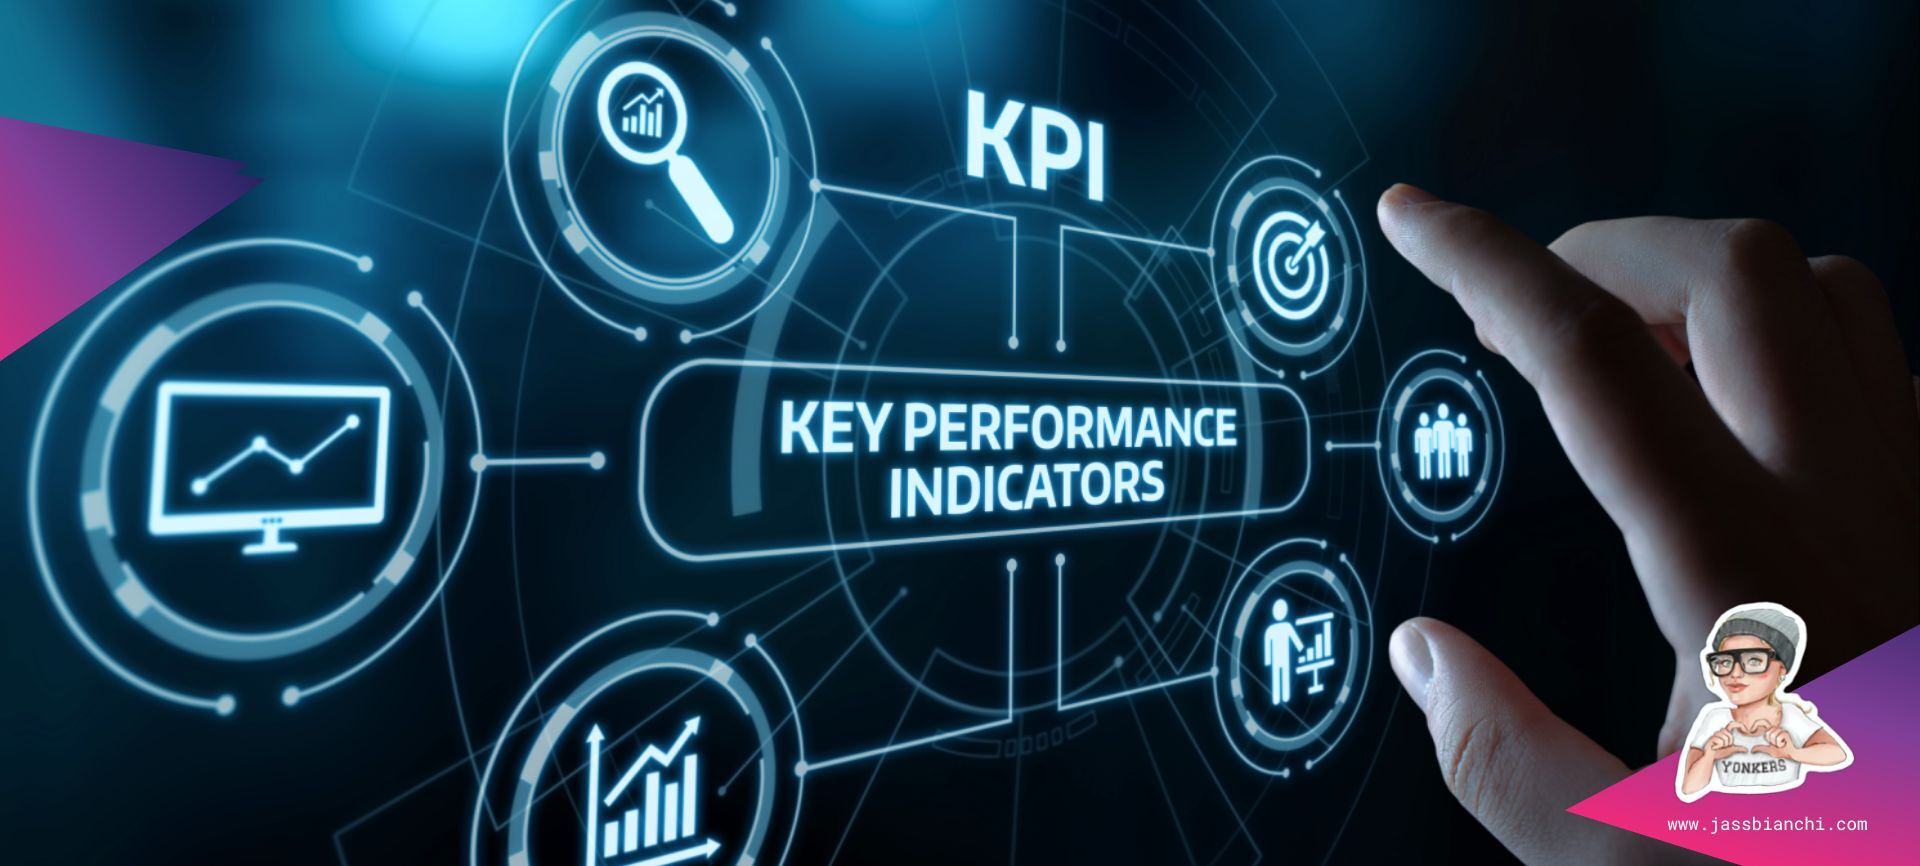 5 Quick & Easy Ways to Enhance Your KPI’s 